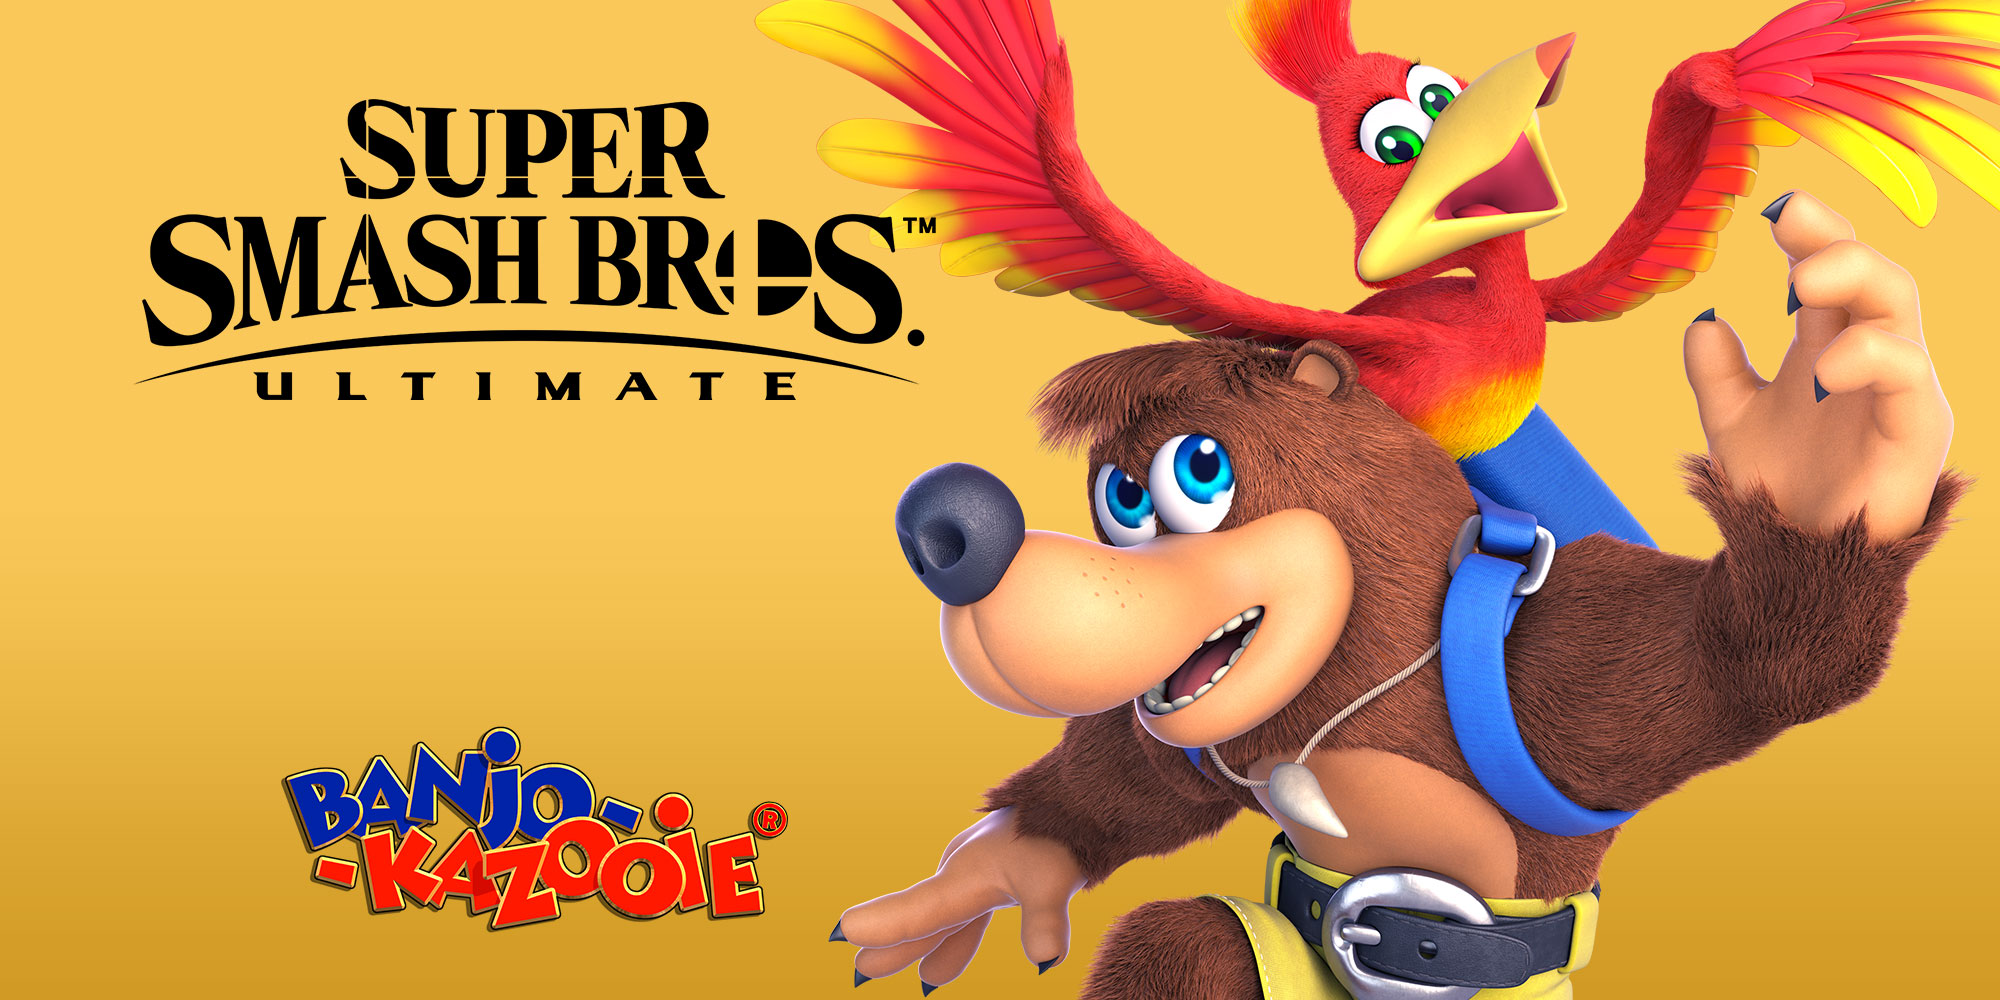 Banjo Kazooie is coming to Nintendo Switch Online, but there's a